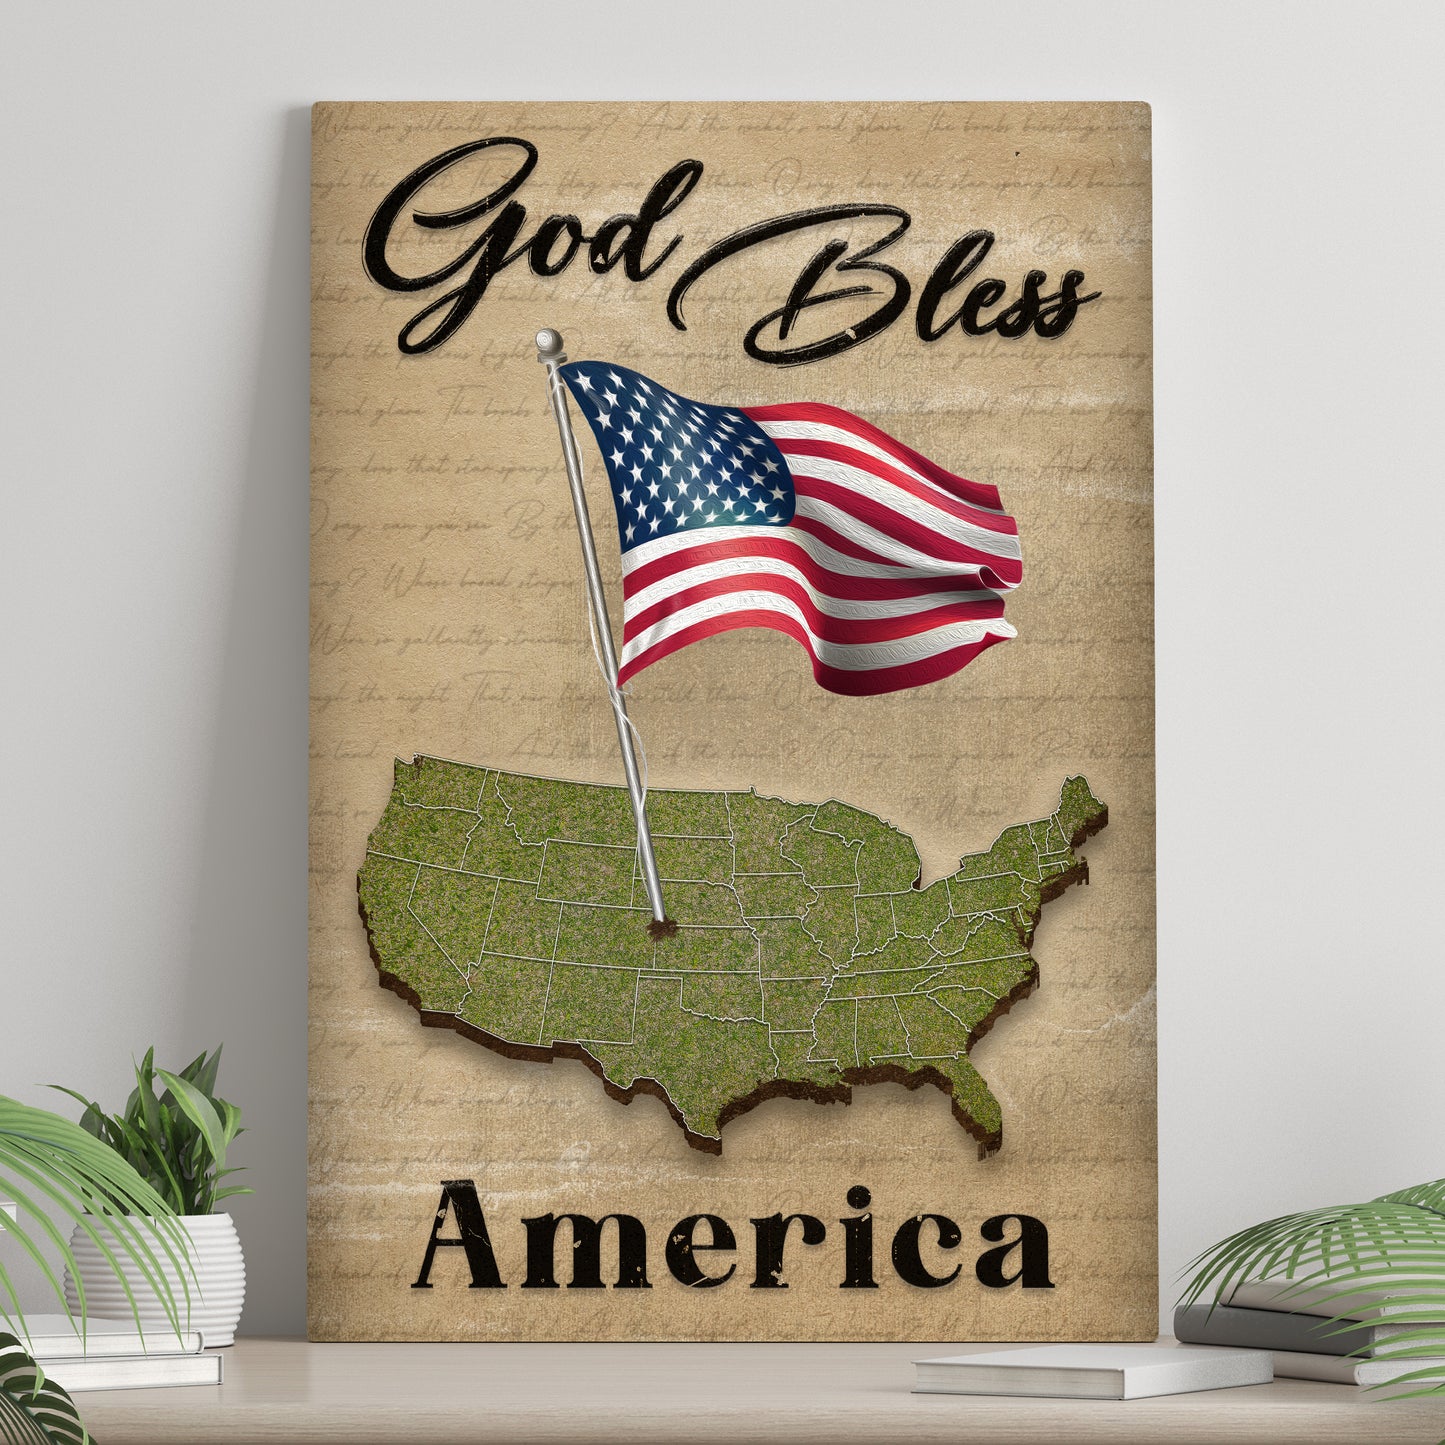 God Bless America Sign VII - Image by Tailored Canvases